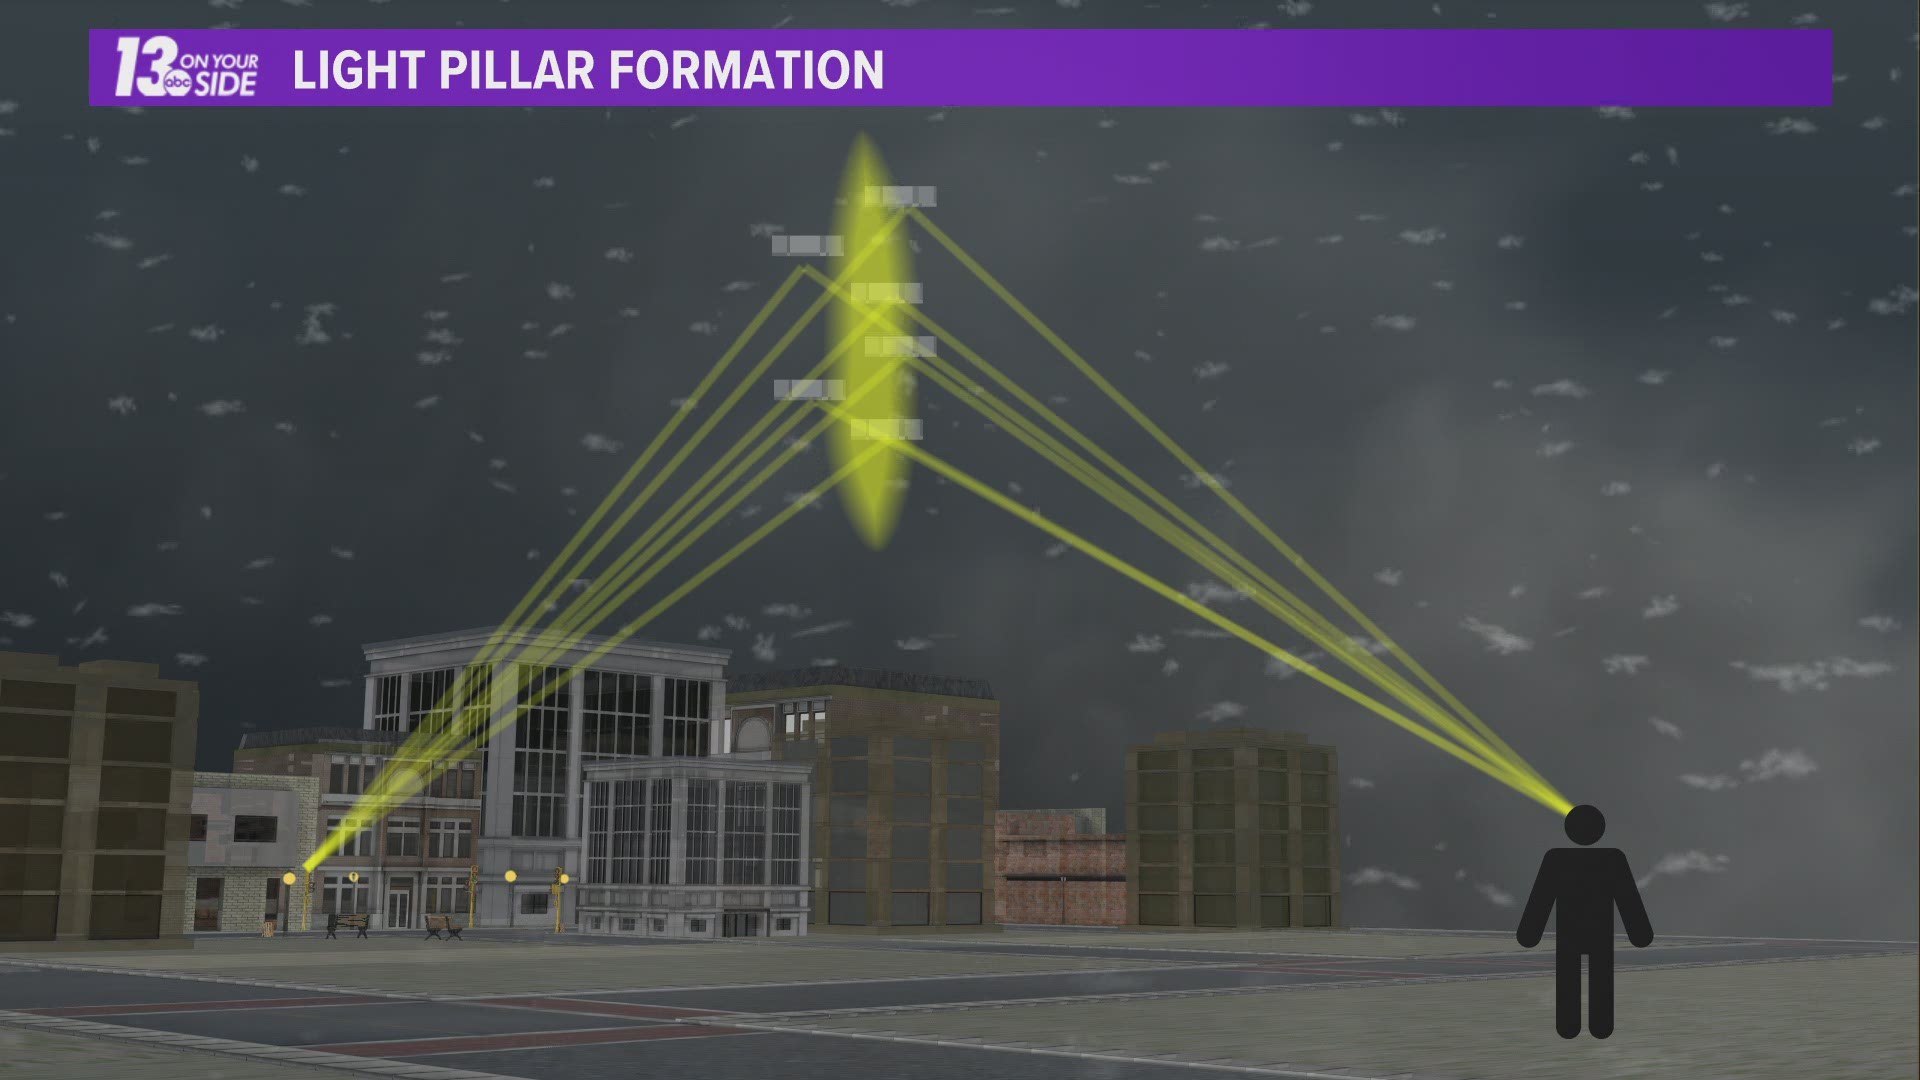 These pillars of light may seem like something from science fiction, but they are a real life phenomenon. Meteorologist Michael Behrens explains how they happen.